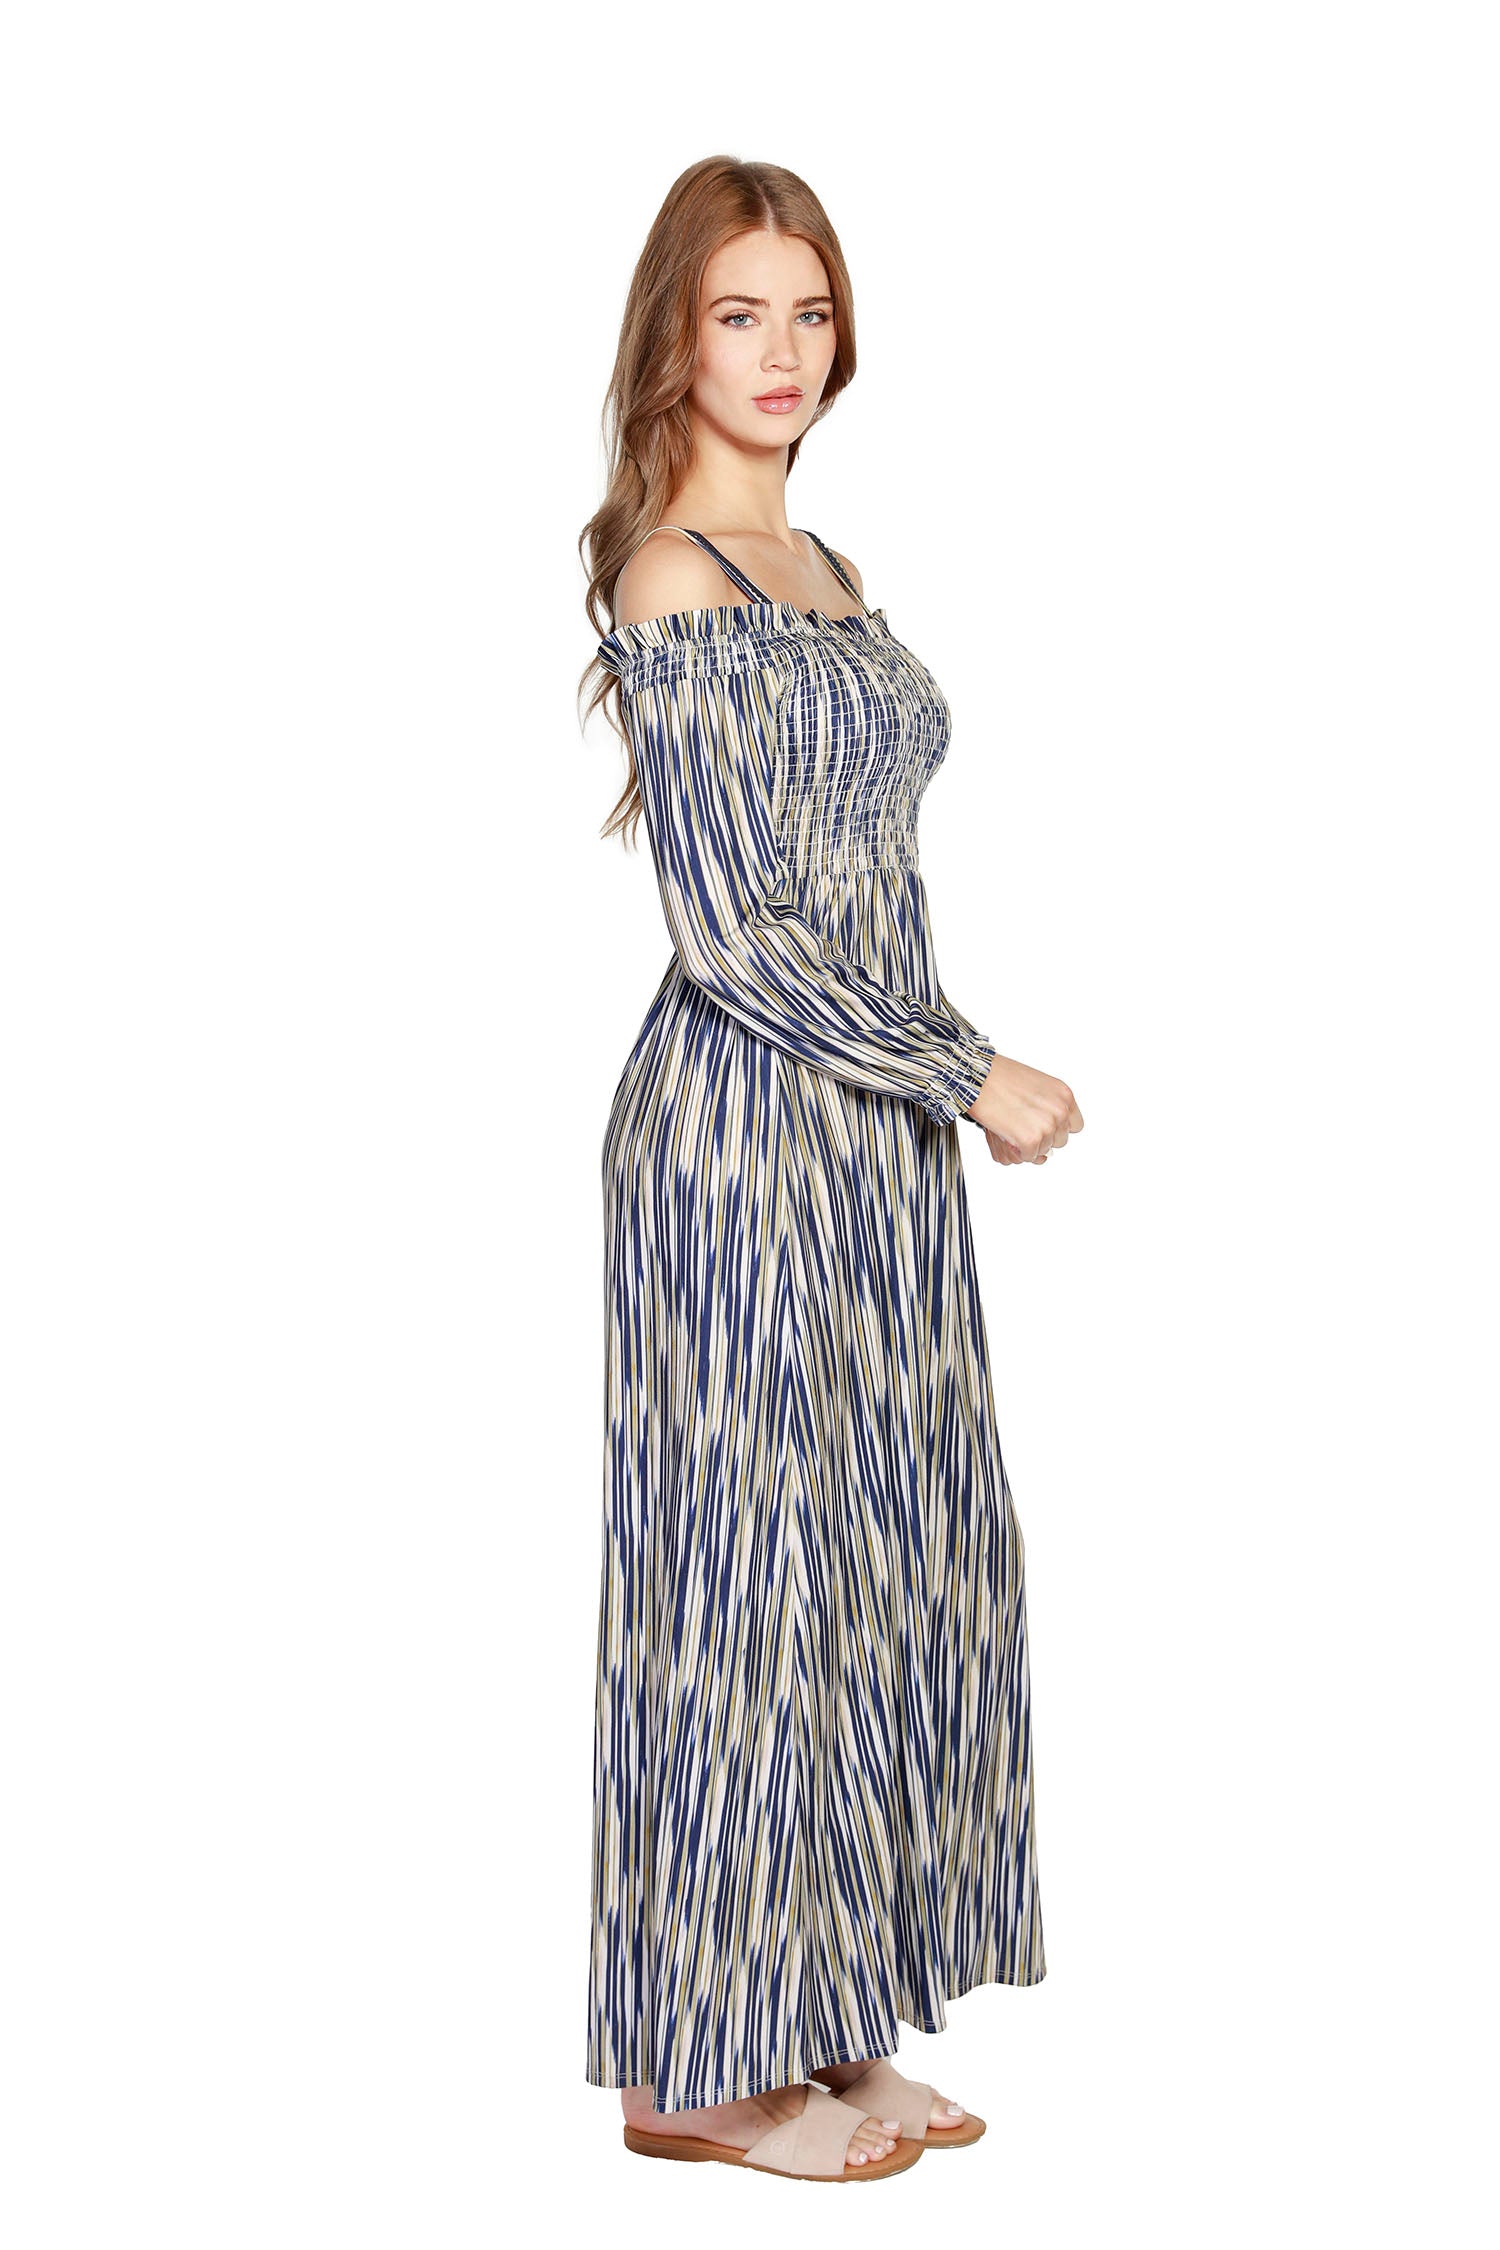 Women's Cold Shoulder Striped Knit Smocked Maxi Dress  |  LAST CALL